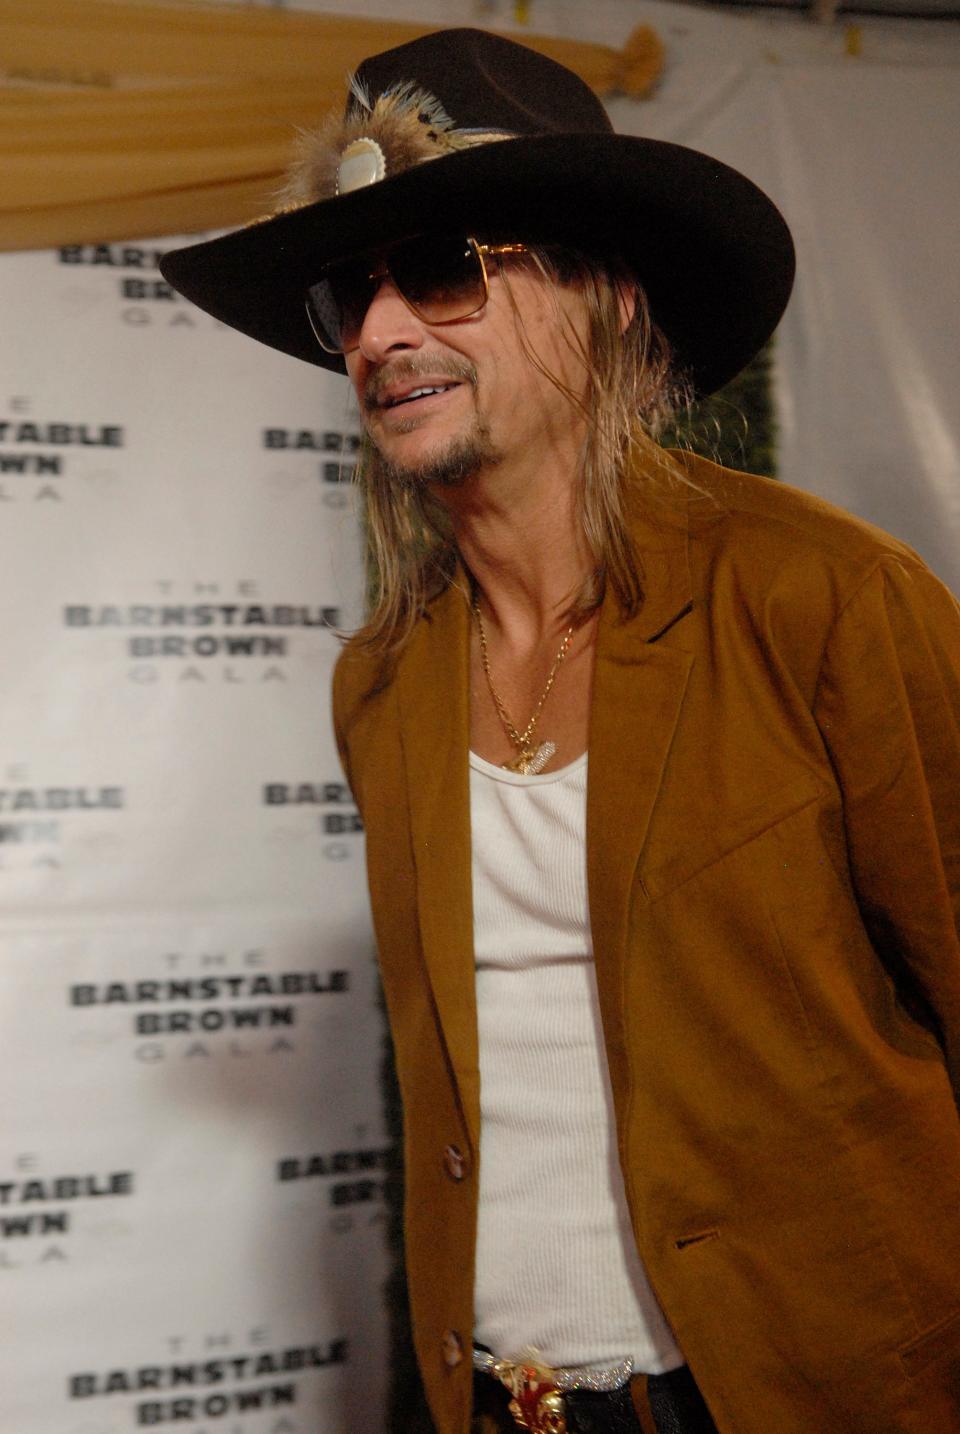 Musician “Kid Rock” Bob Ritchie on the red carpet at the 35th annual Barnstable Brown Gala on Friday night. May 03, 2024